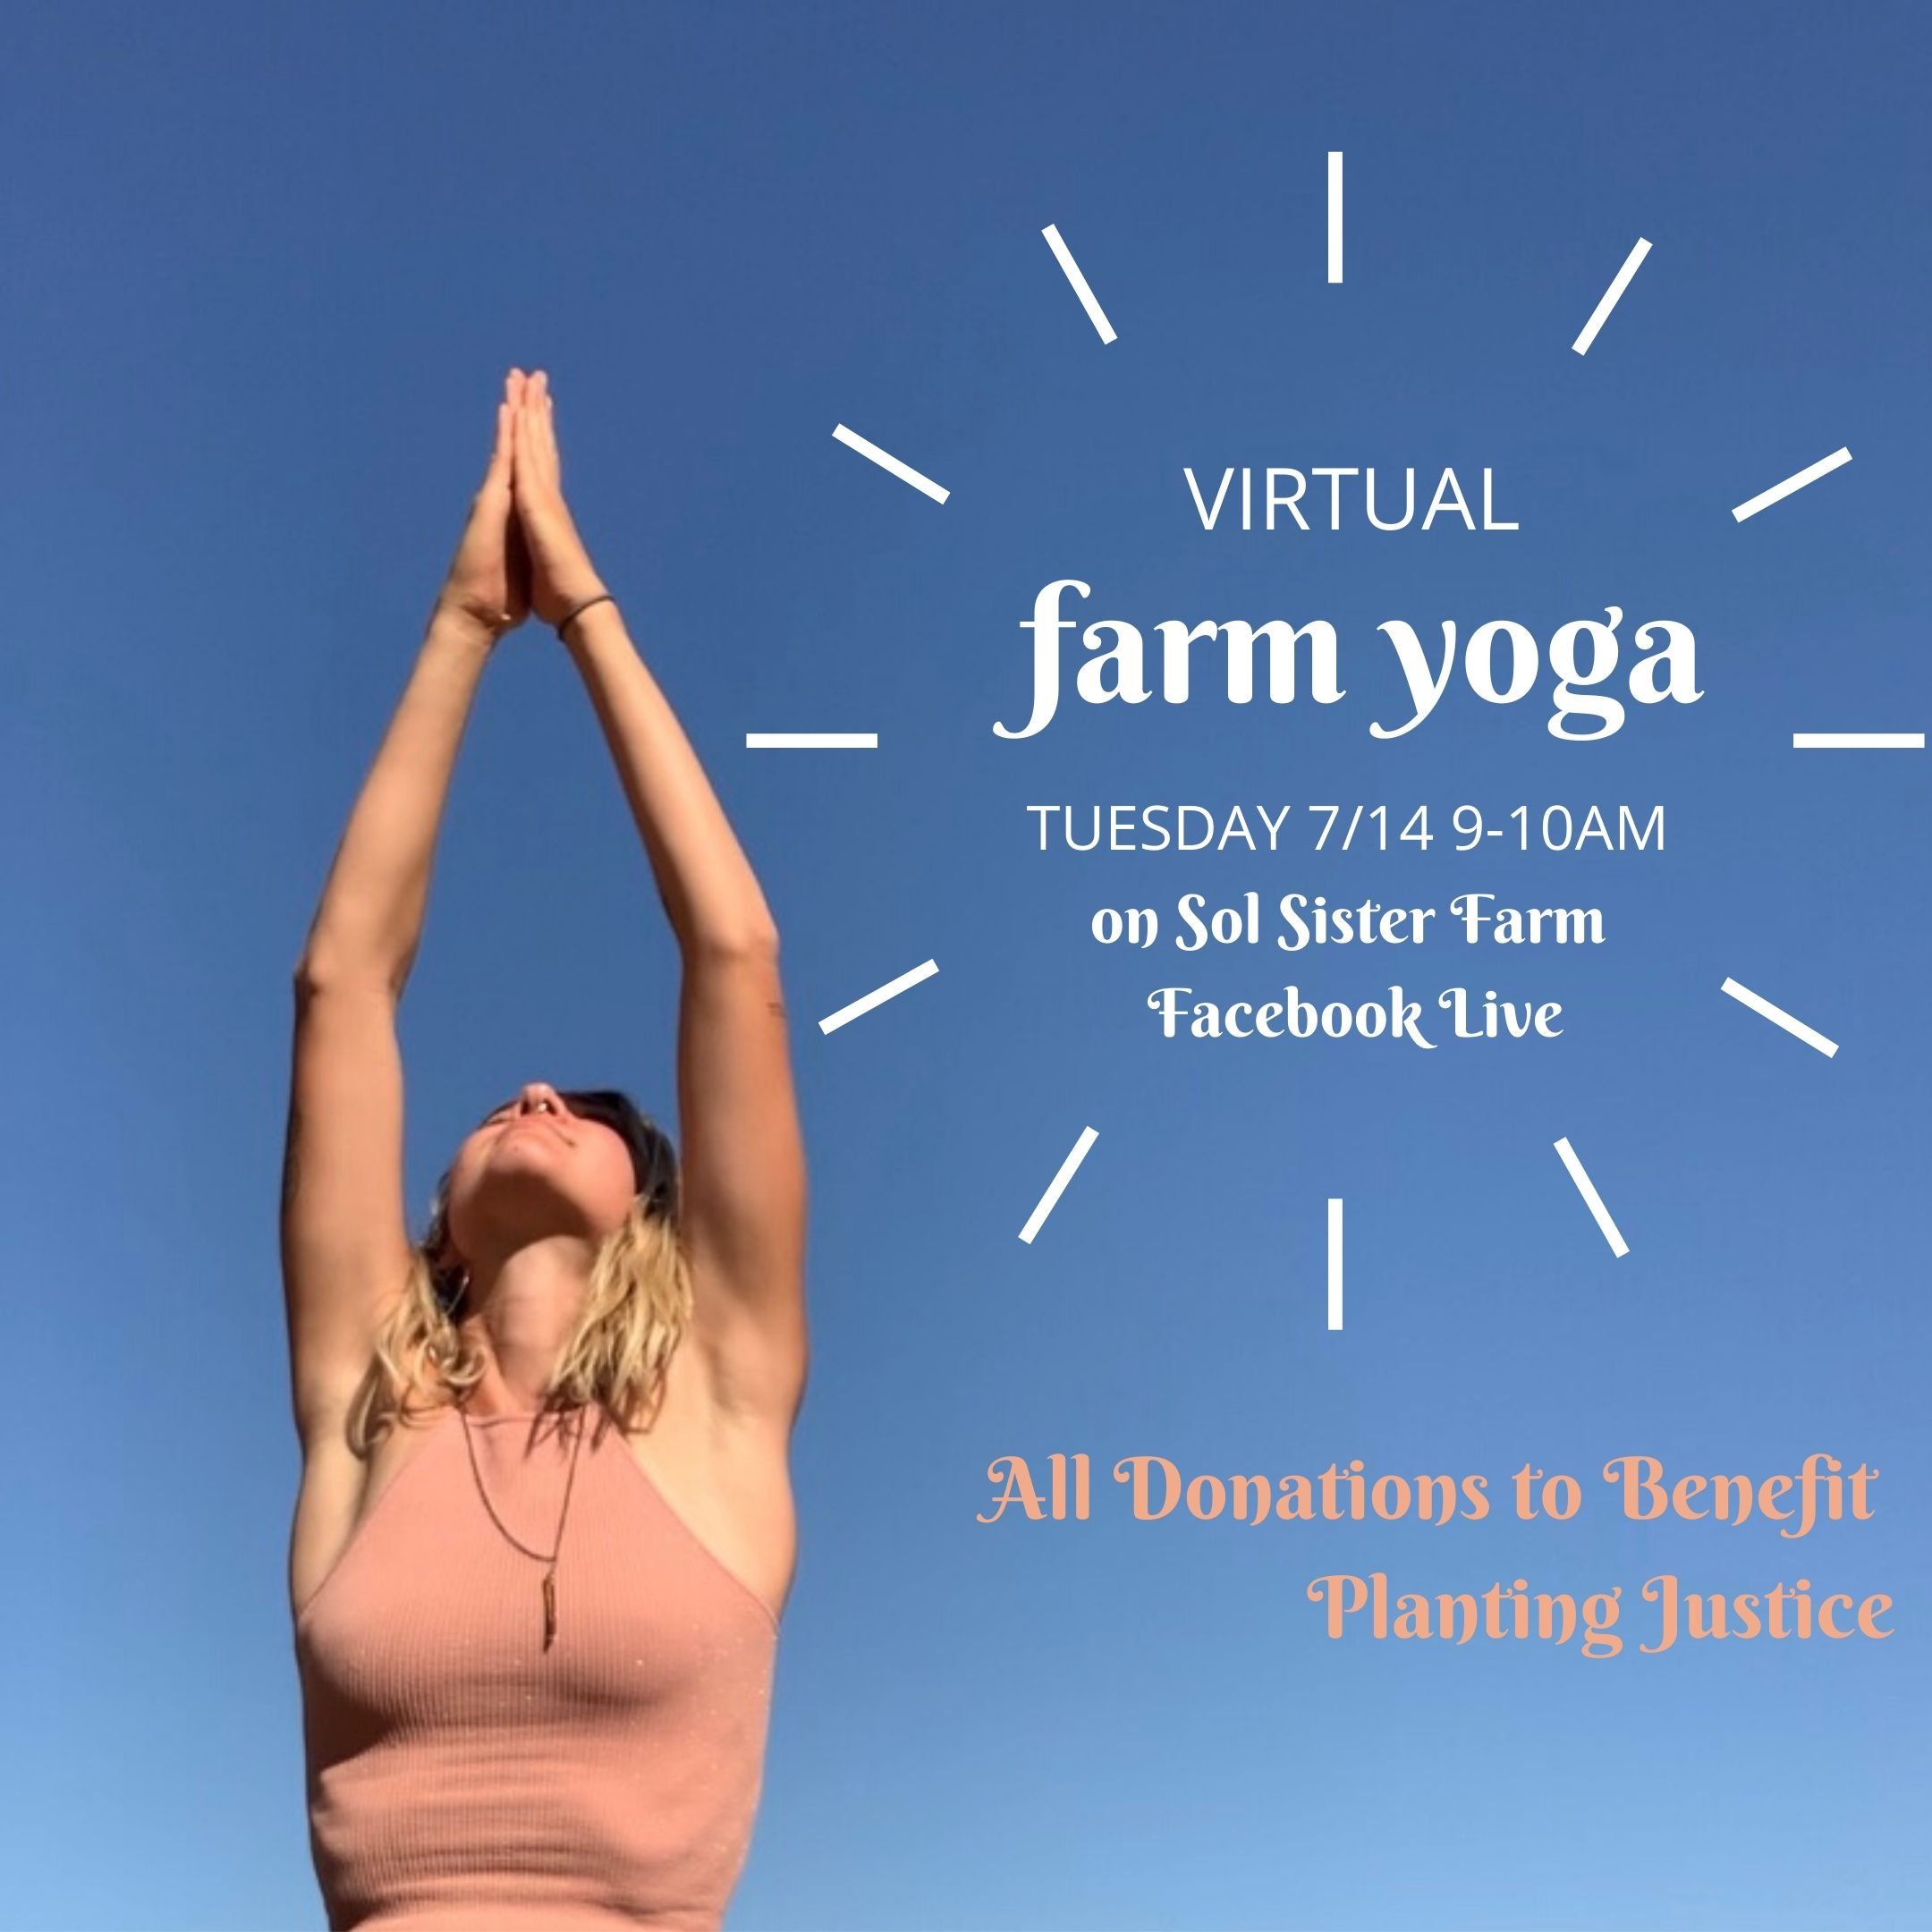 Next Happening: Farm Happening: Donate to Planting Justice and Virtual Farm Yoga